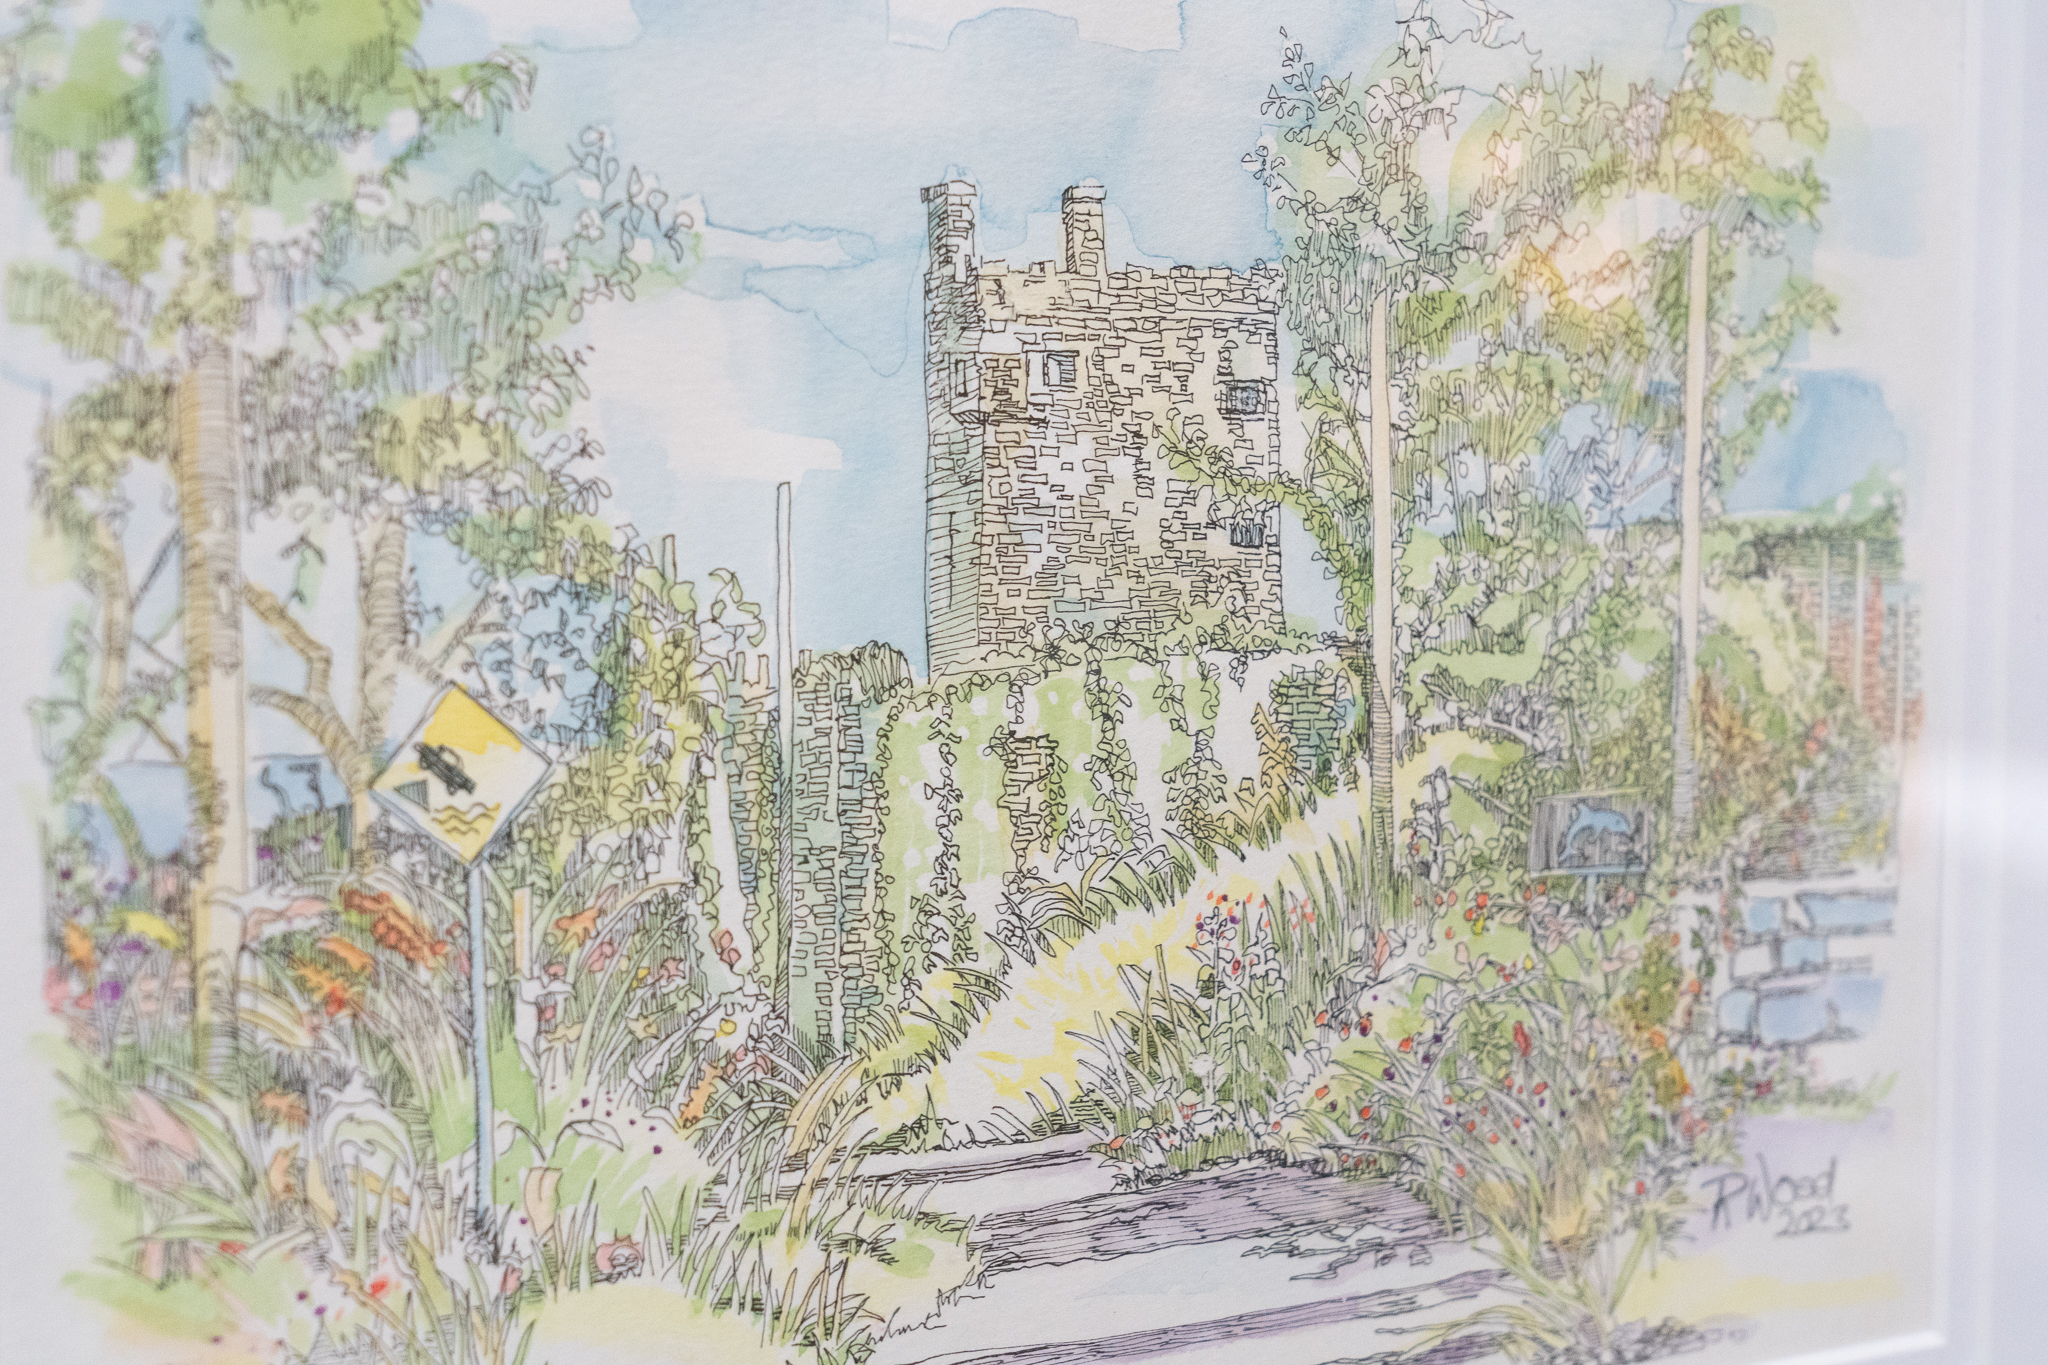 Ruth Wood Pen and Ink and Watercolour original painting Carrigaholt Castle Ireland's Wild Atlantic Way Tourism Ireland old heritage sites castle building gift interiors original work Irish contemporary art Kilbaha Gallery